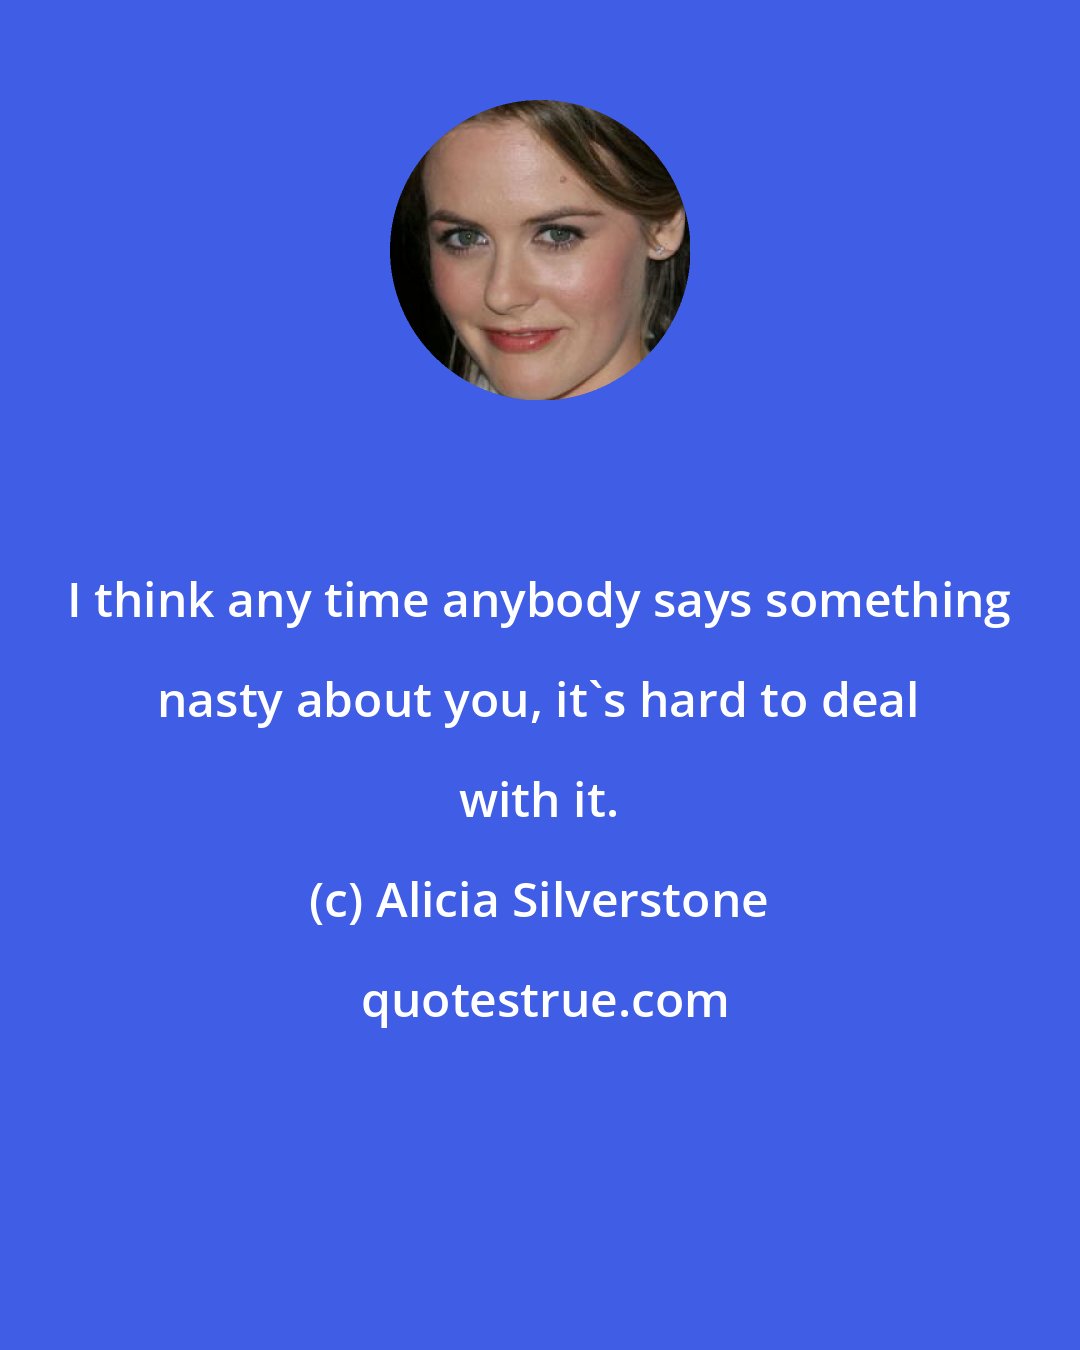 Alicia Silverstone: I think any time anybody says something nasty about you, it's hard to deal with it.